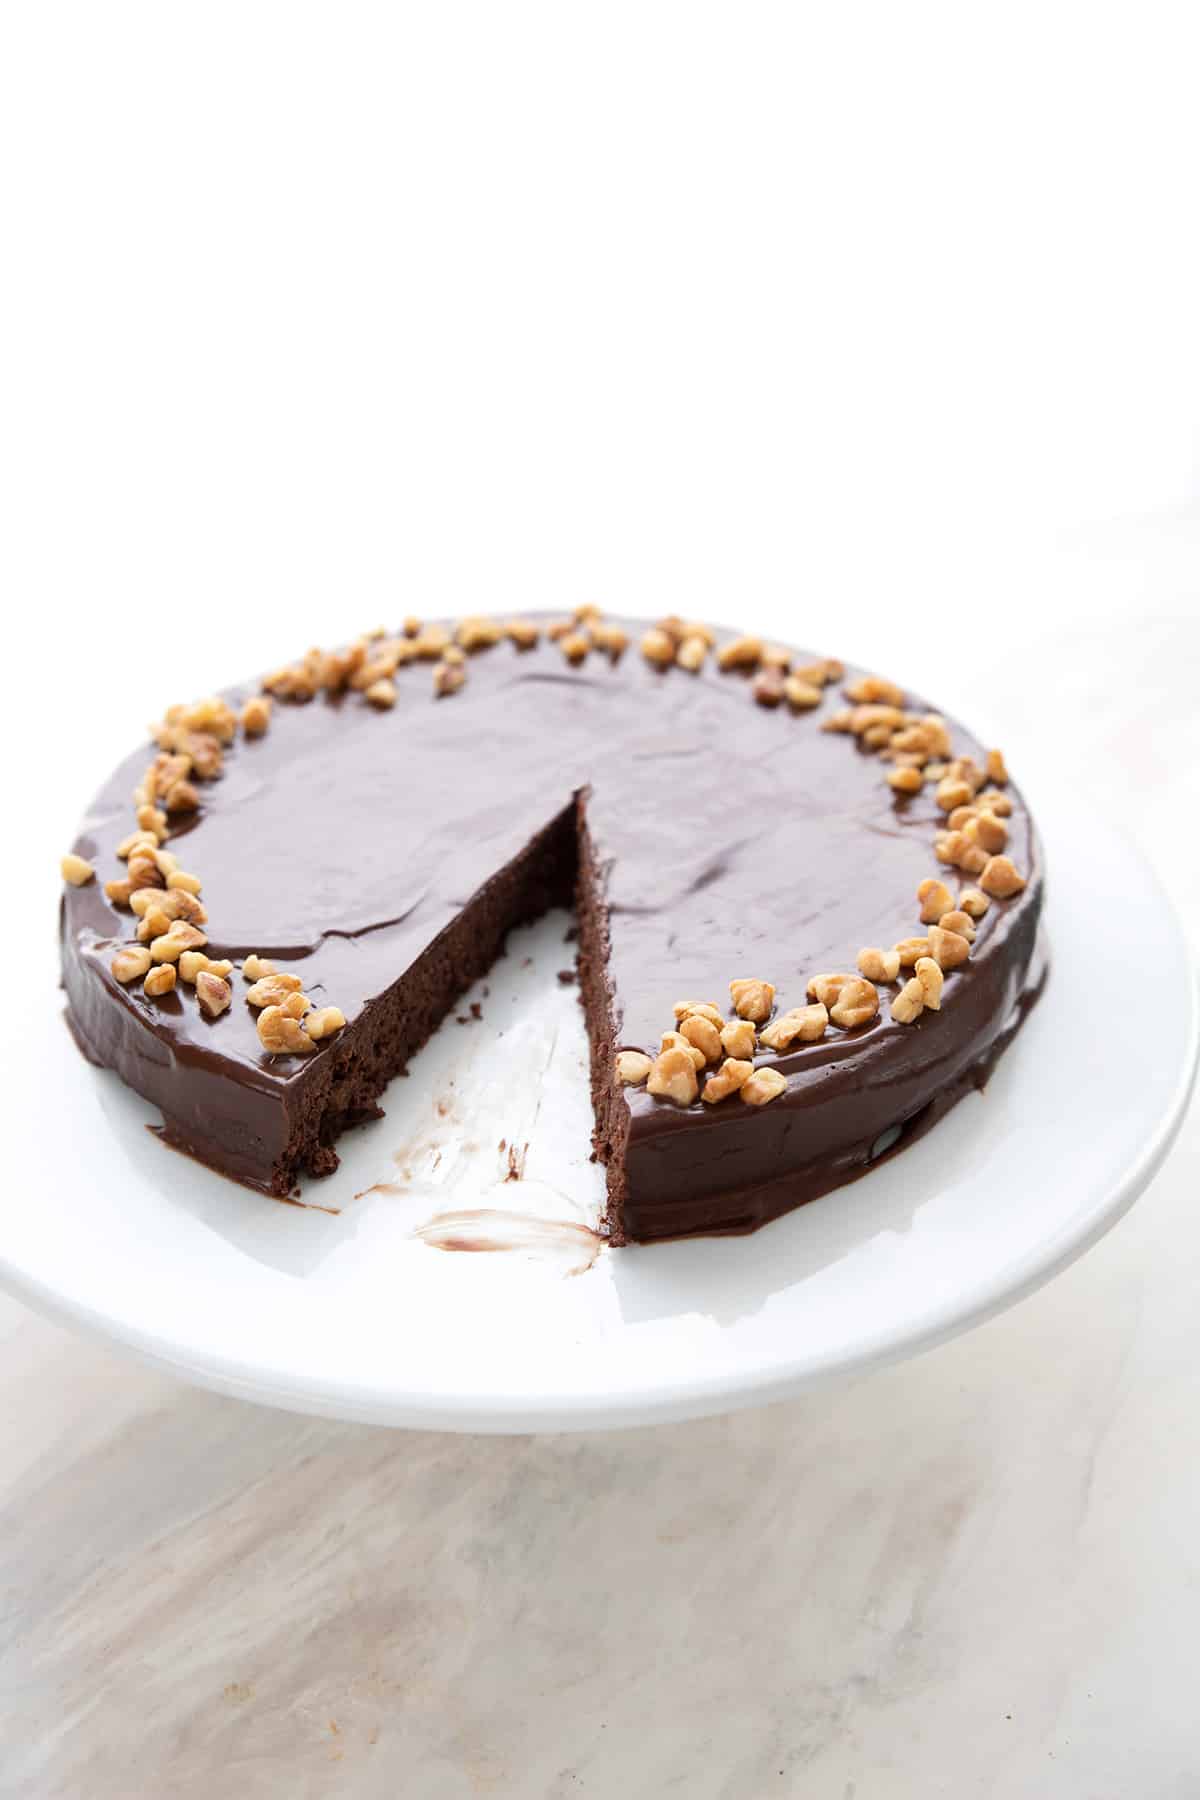 Chocolate walnut torte on a white cake plate with a slice taken out of it.